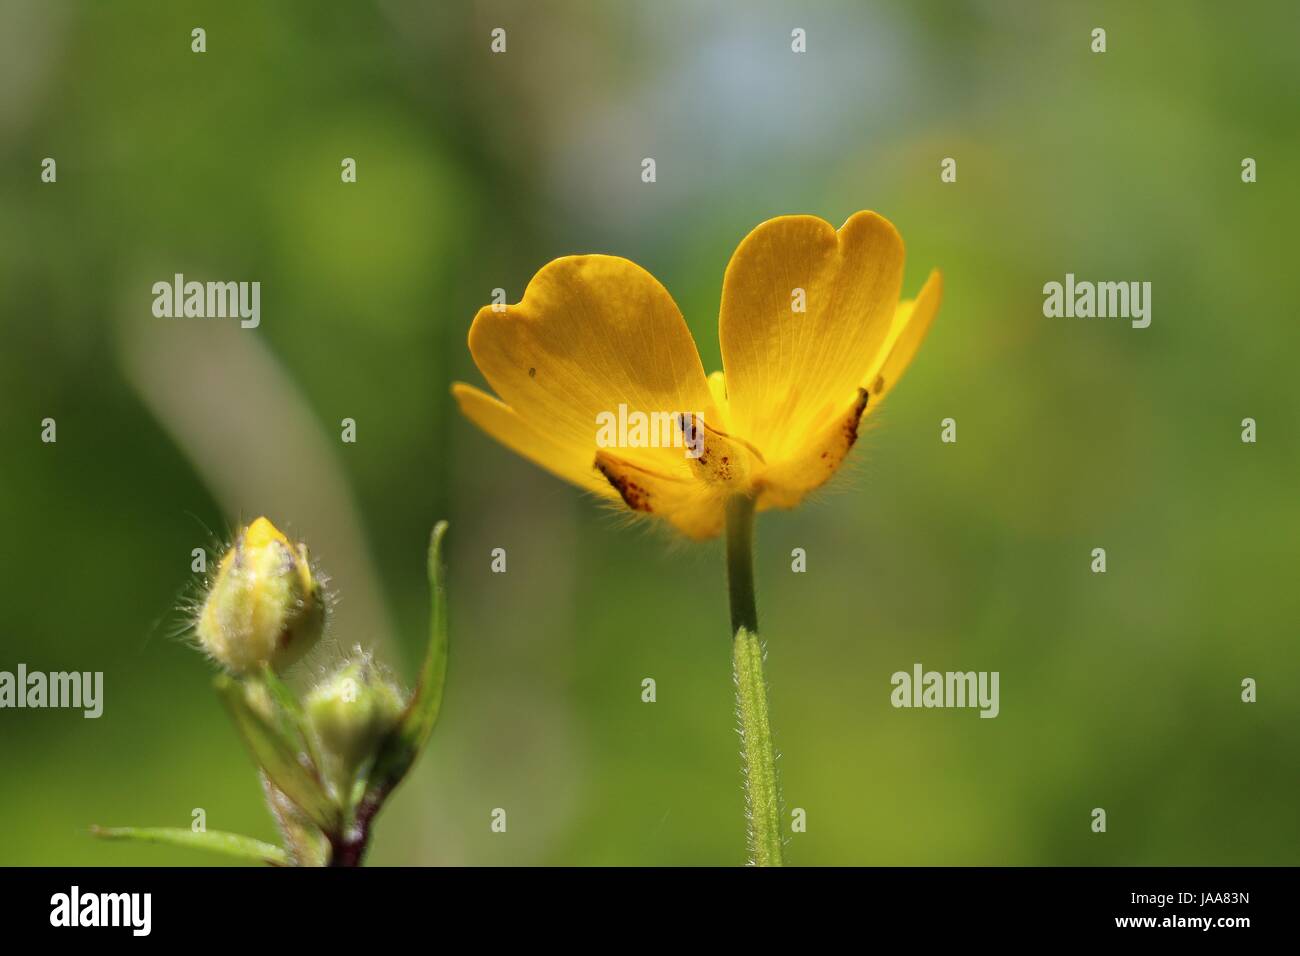 Single Yellow Creeping Buttercup Flower, Ranunculus repens, shimmering in the summer sun on a natural green background; under view. Stock Photo